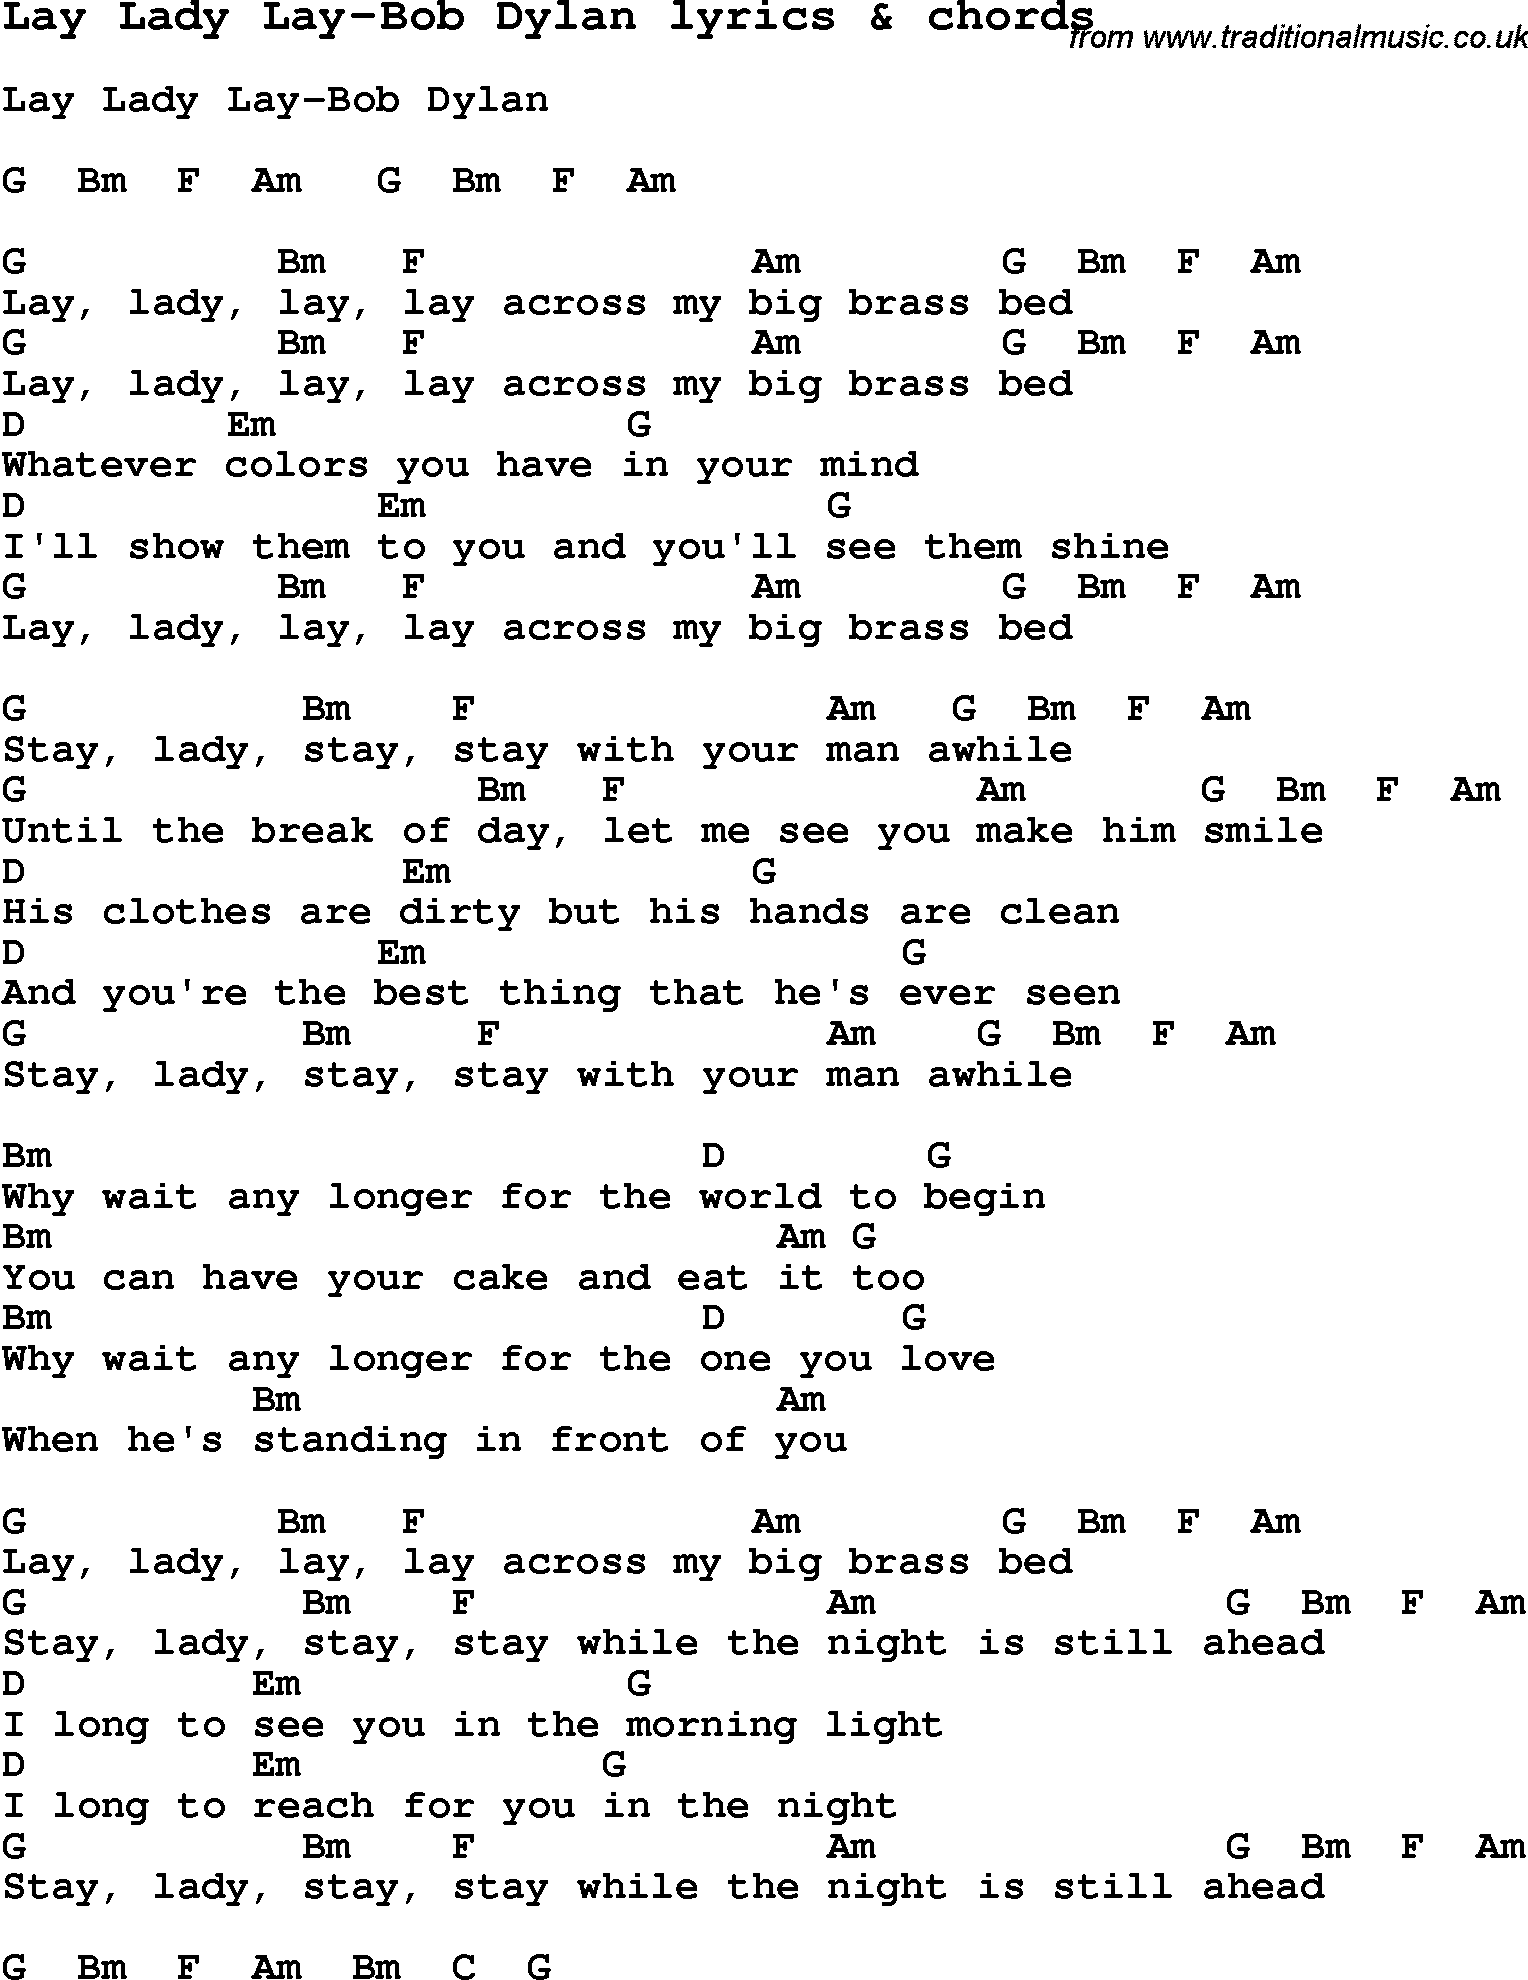 Love Song Lyrics for: Lay Lady Lay-Bob Dylan with chords for Ukulele, Guitar Banjo etc.